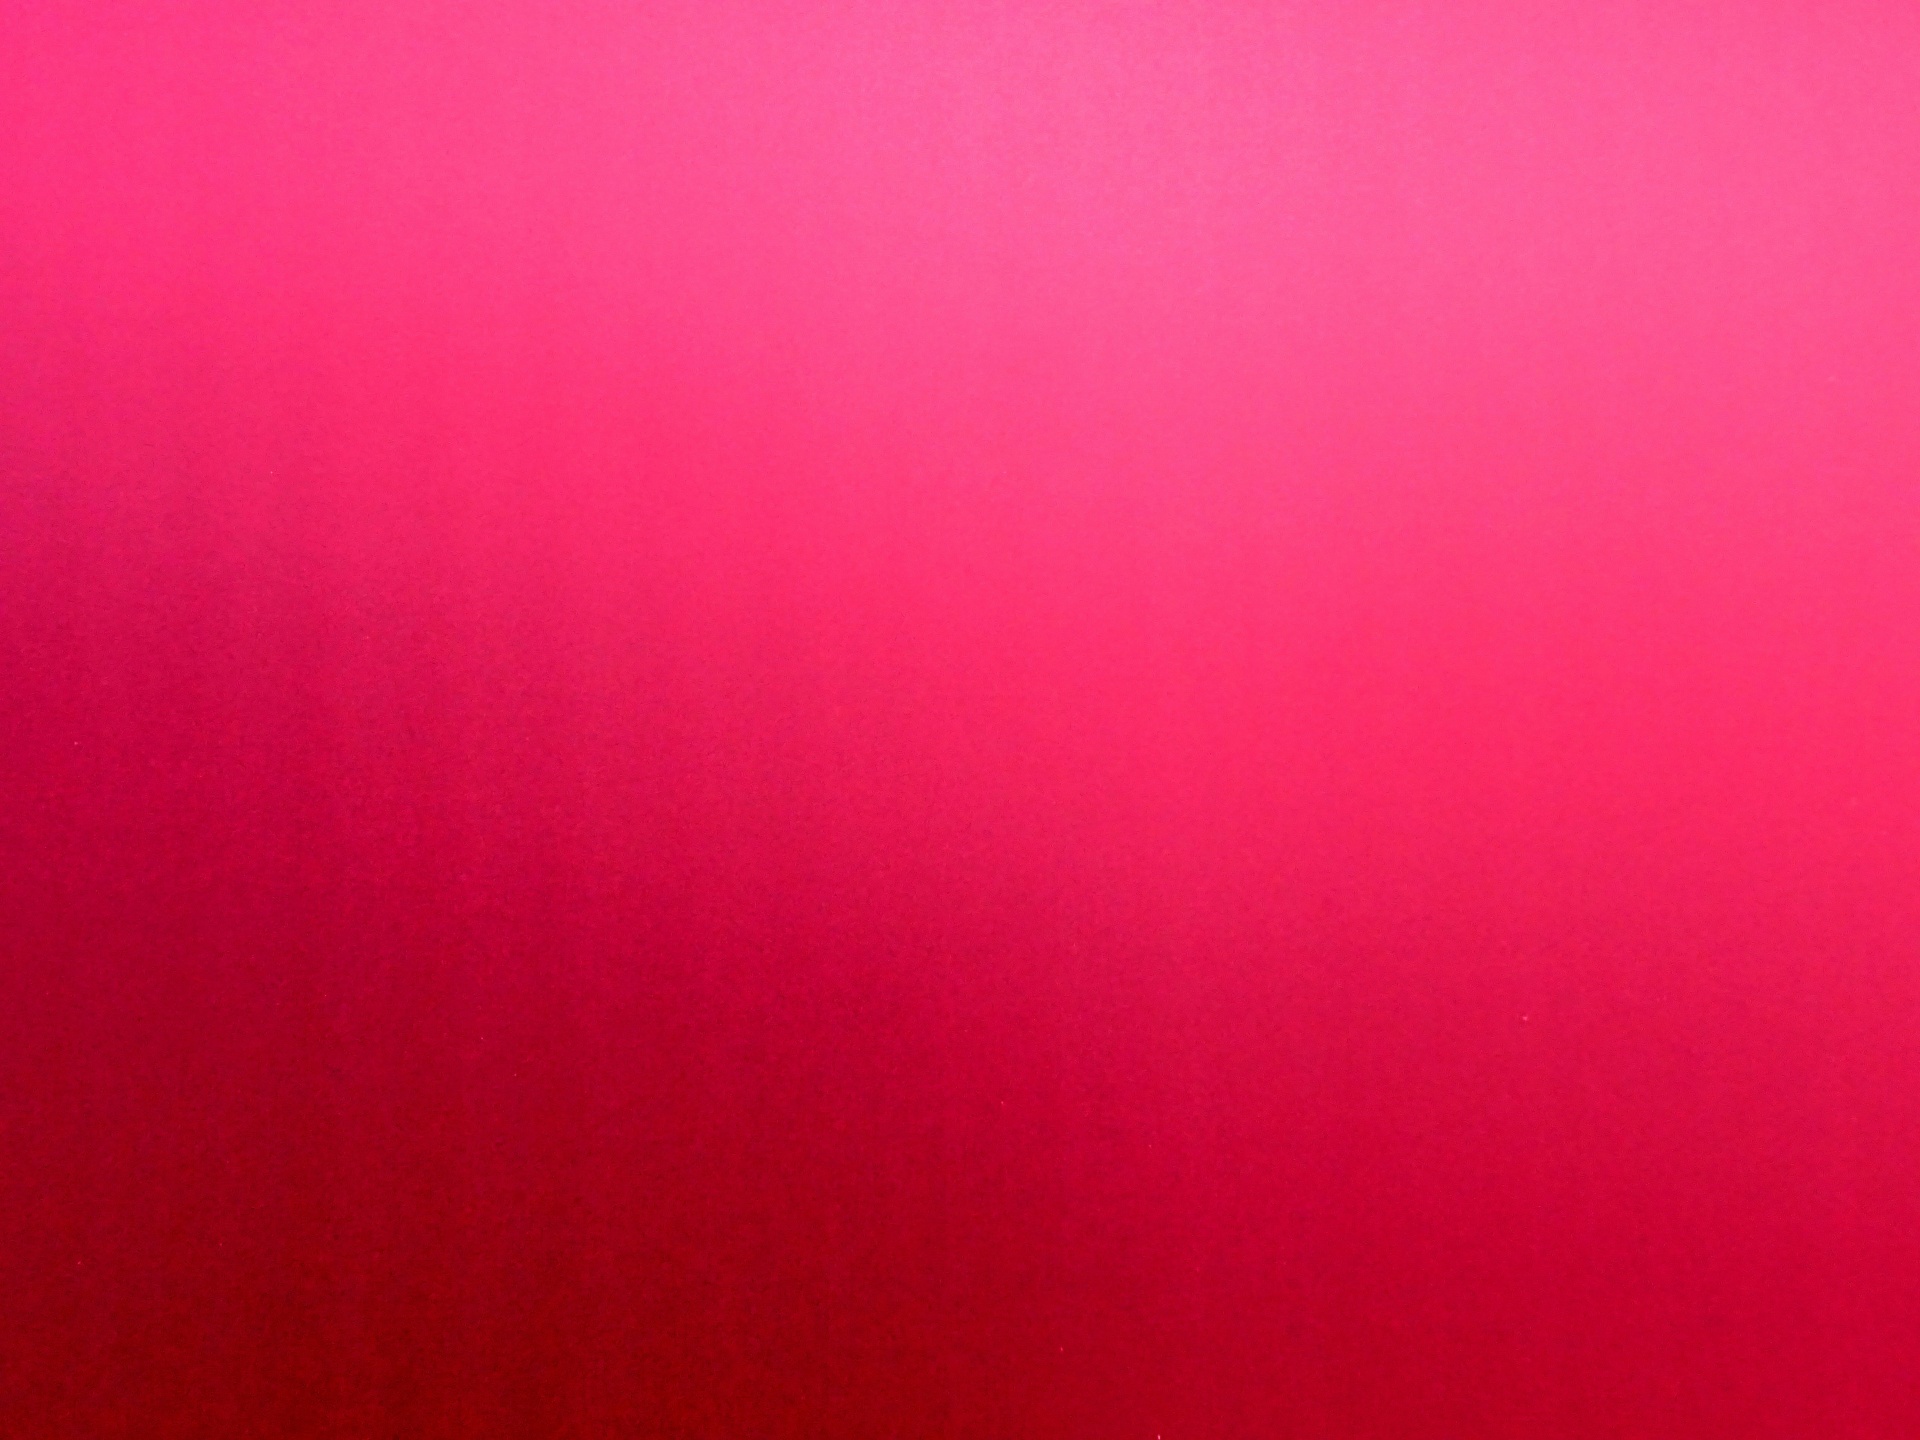 red,pink,background,web,website,webpage,wallpaper,page,pages,design,designs...